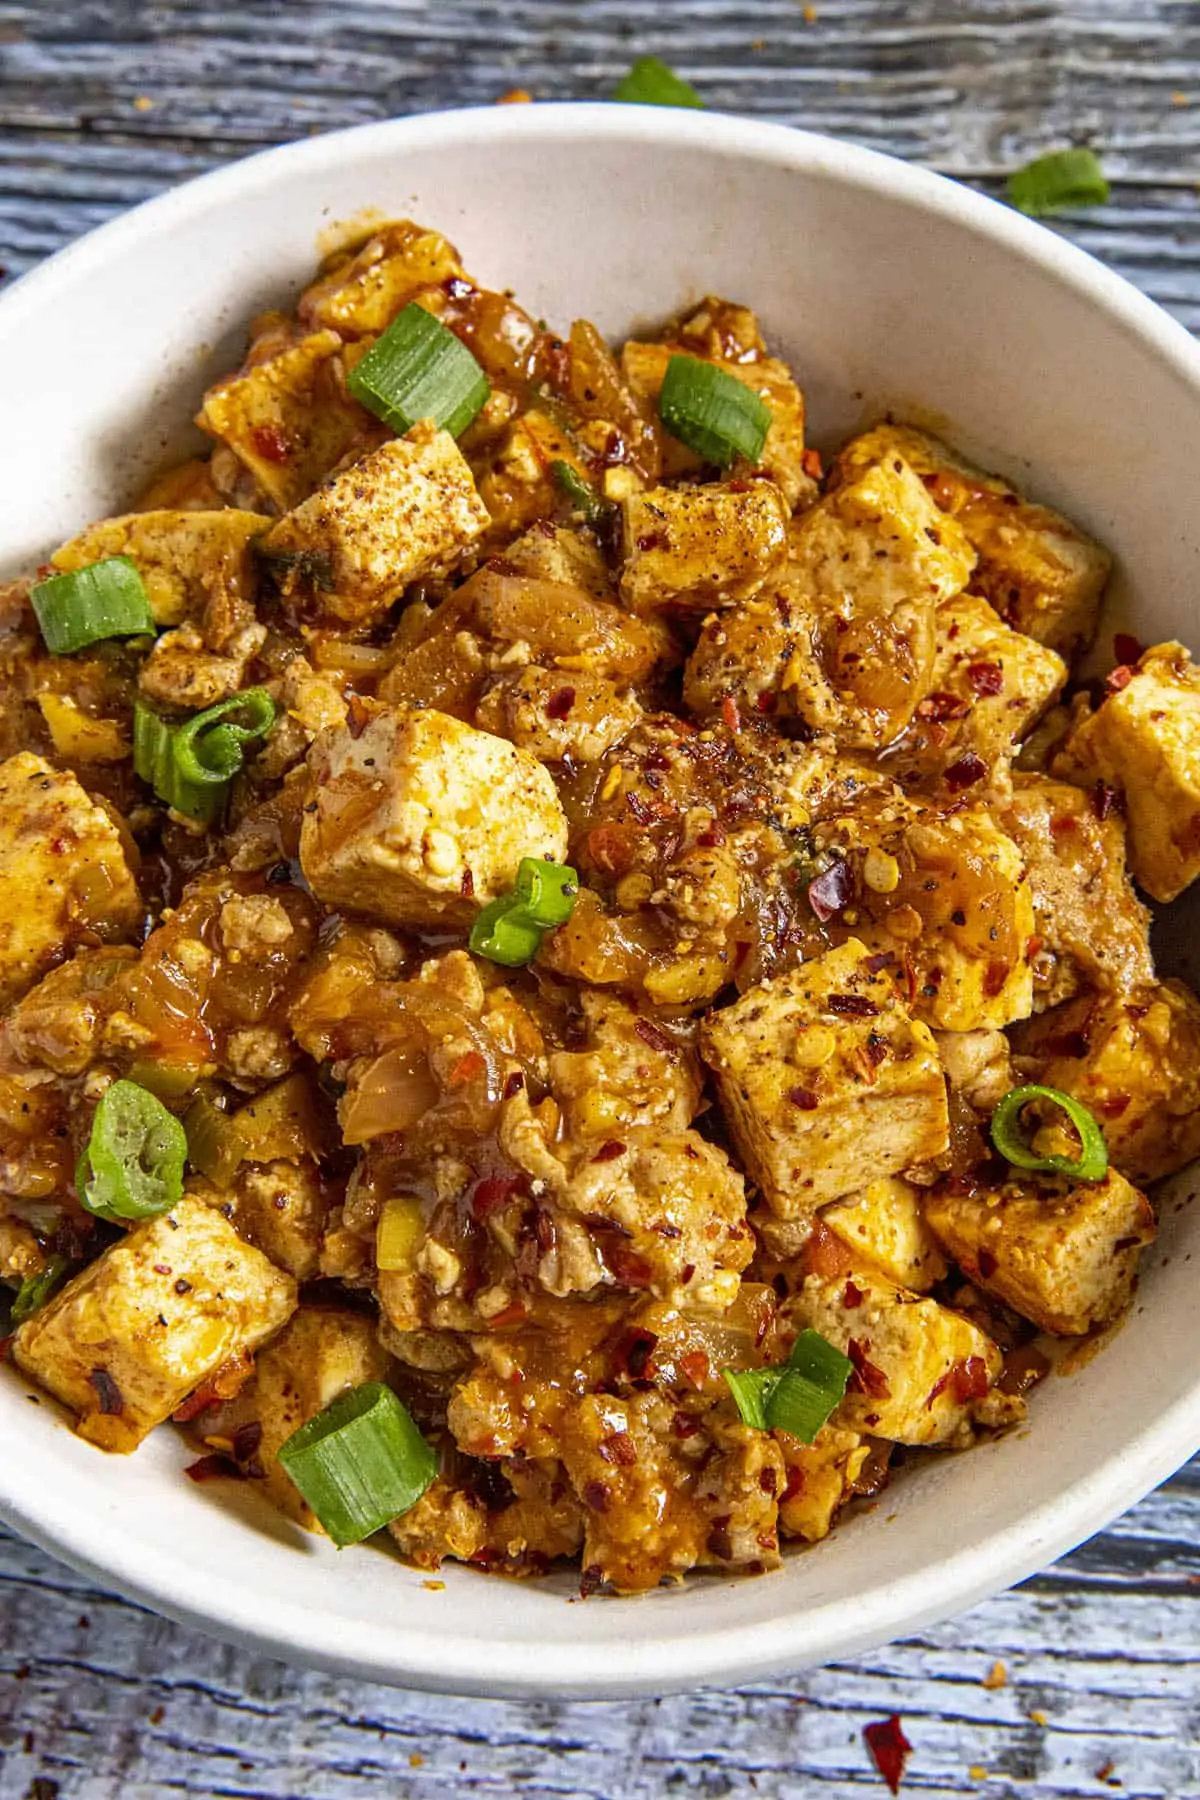 Mapo Tofu in a bowl, ready to serve.